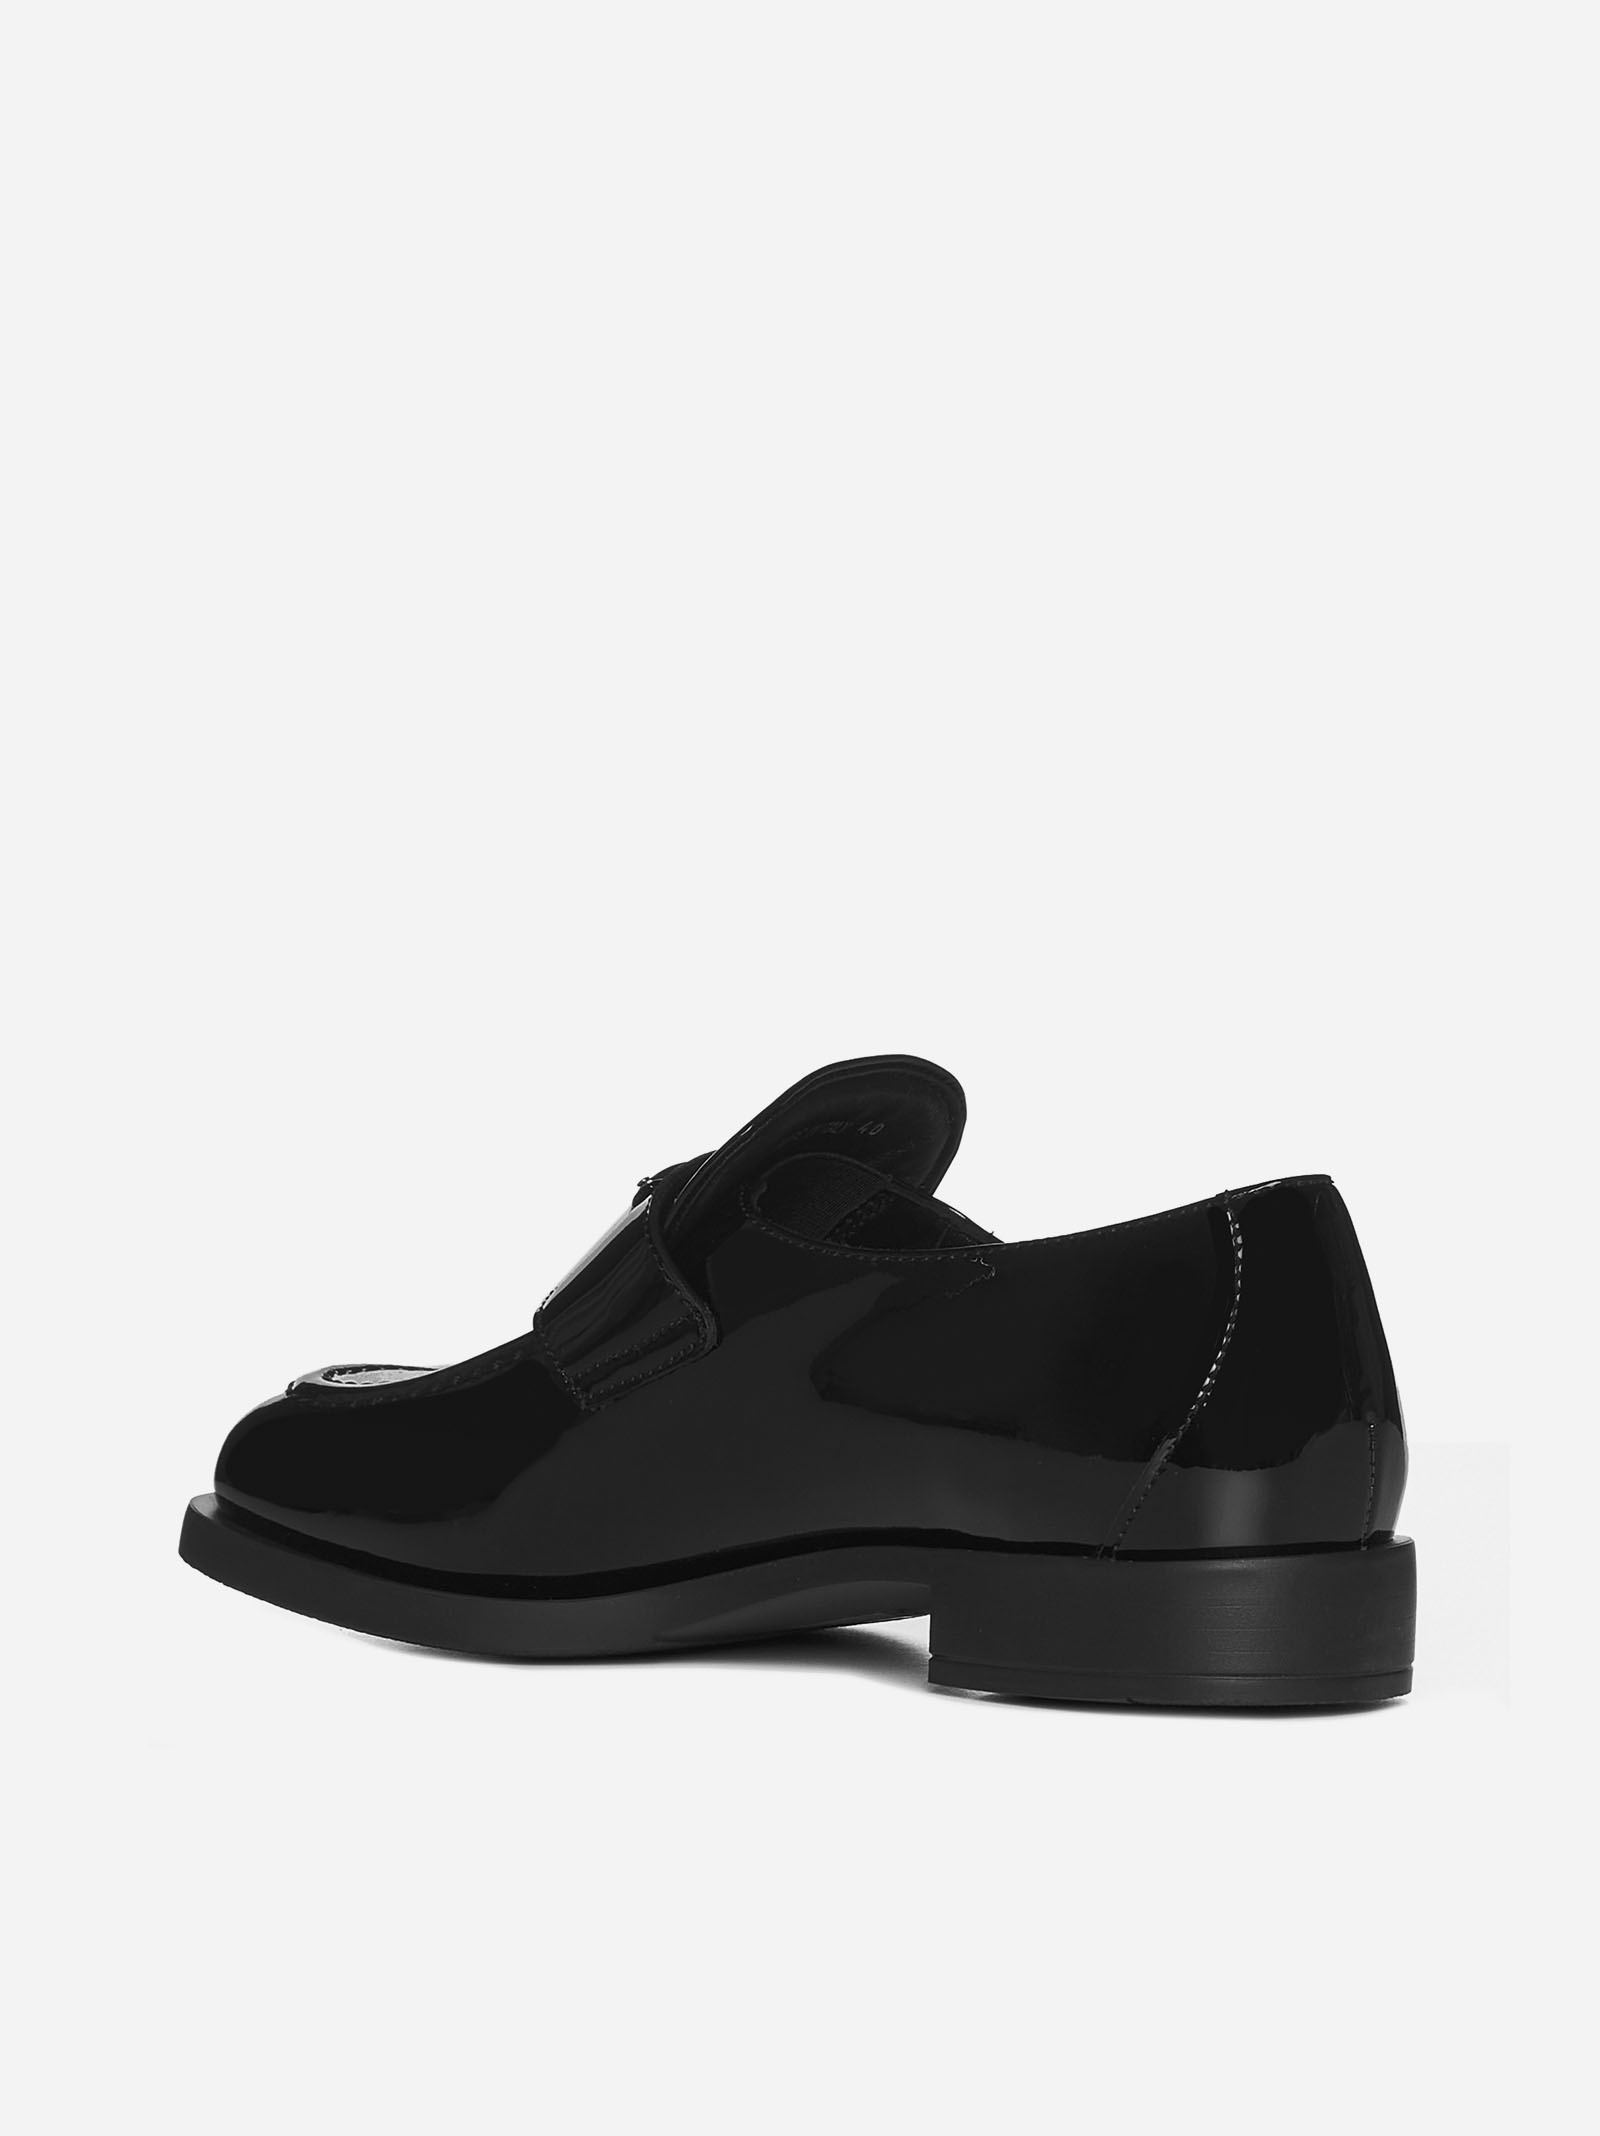 Patent leather loafers - 3